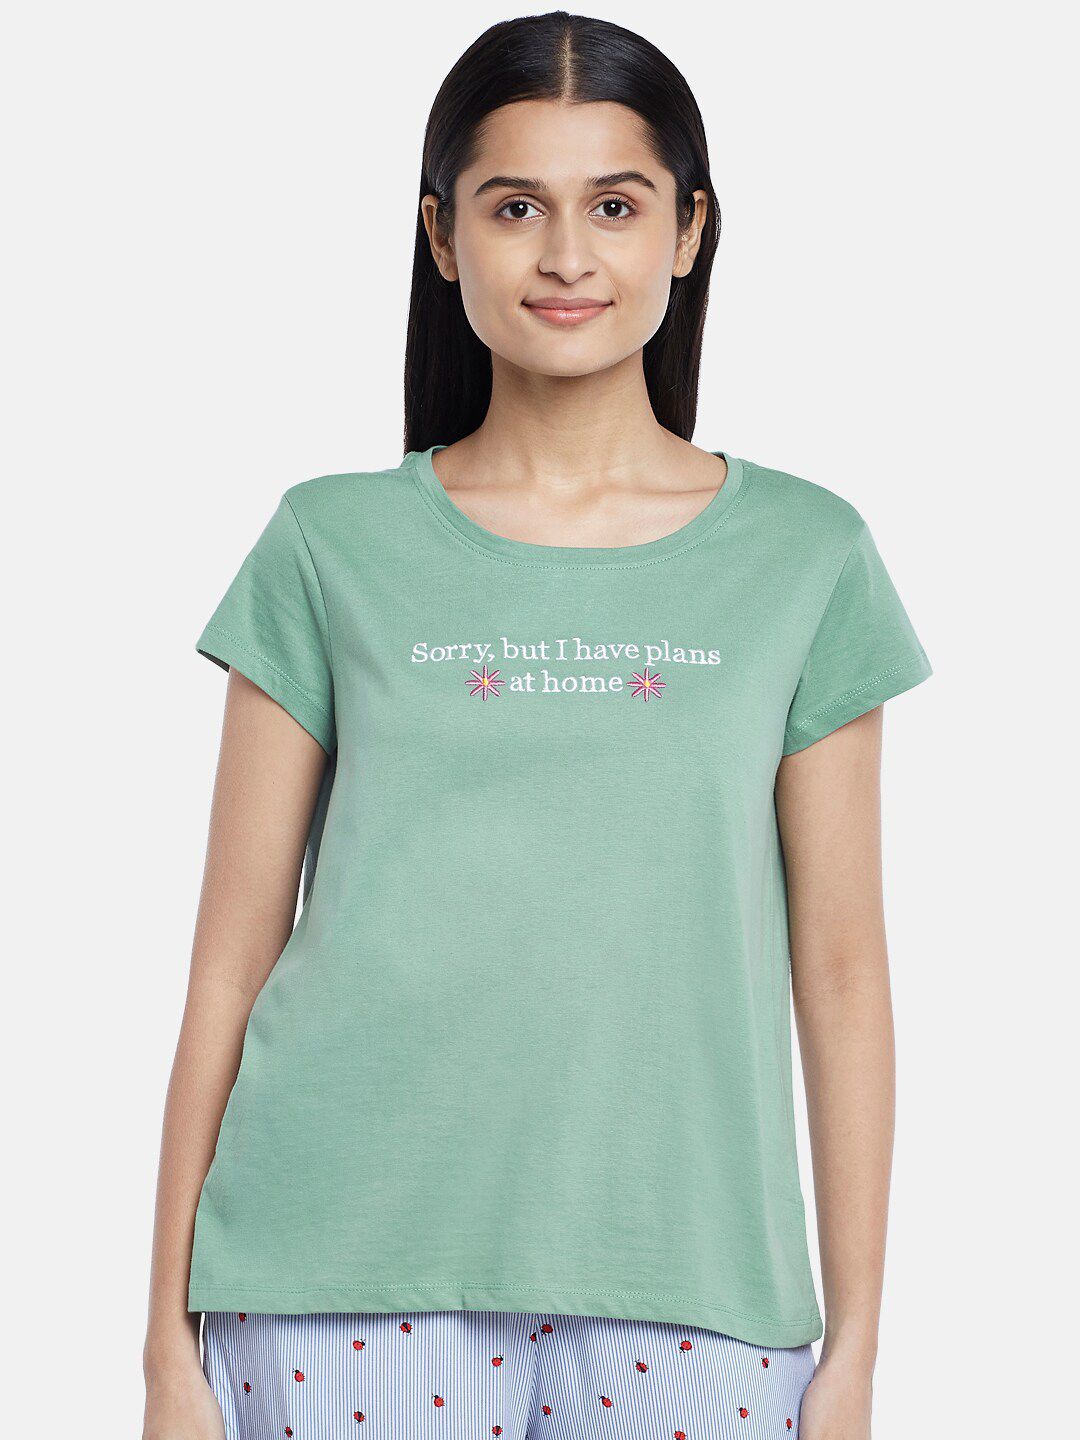 Dreamz by Pantaloons Green Cotton Lounge tshirt Price in India